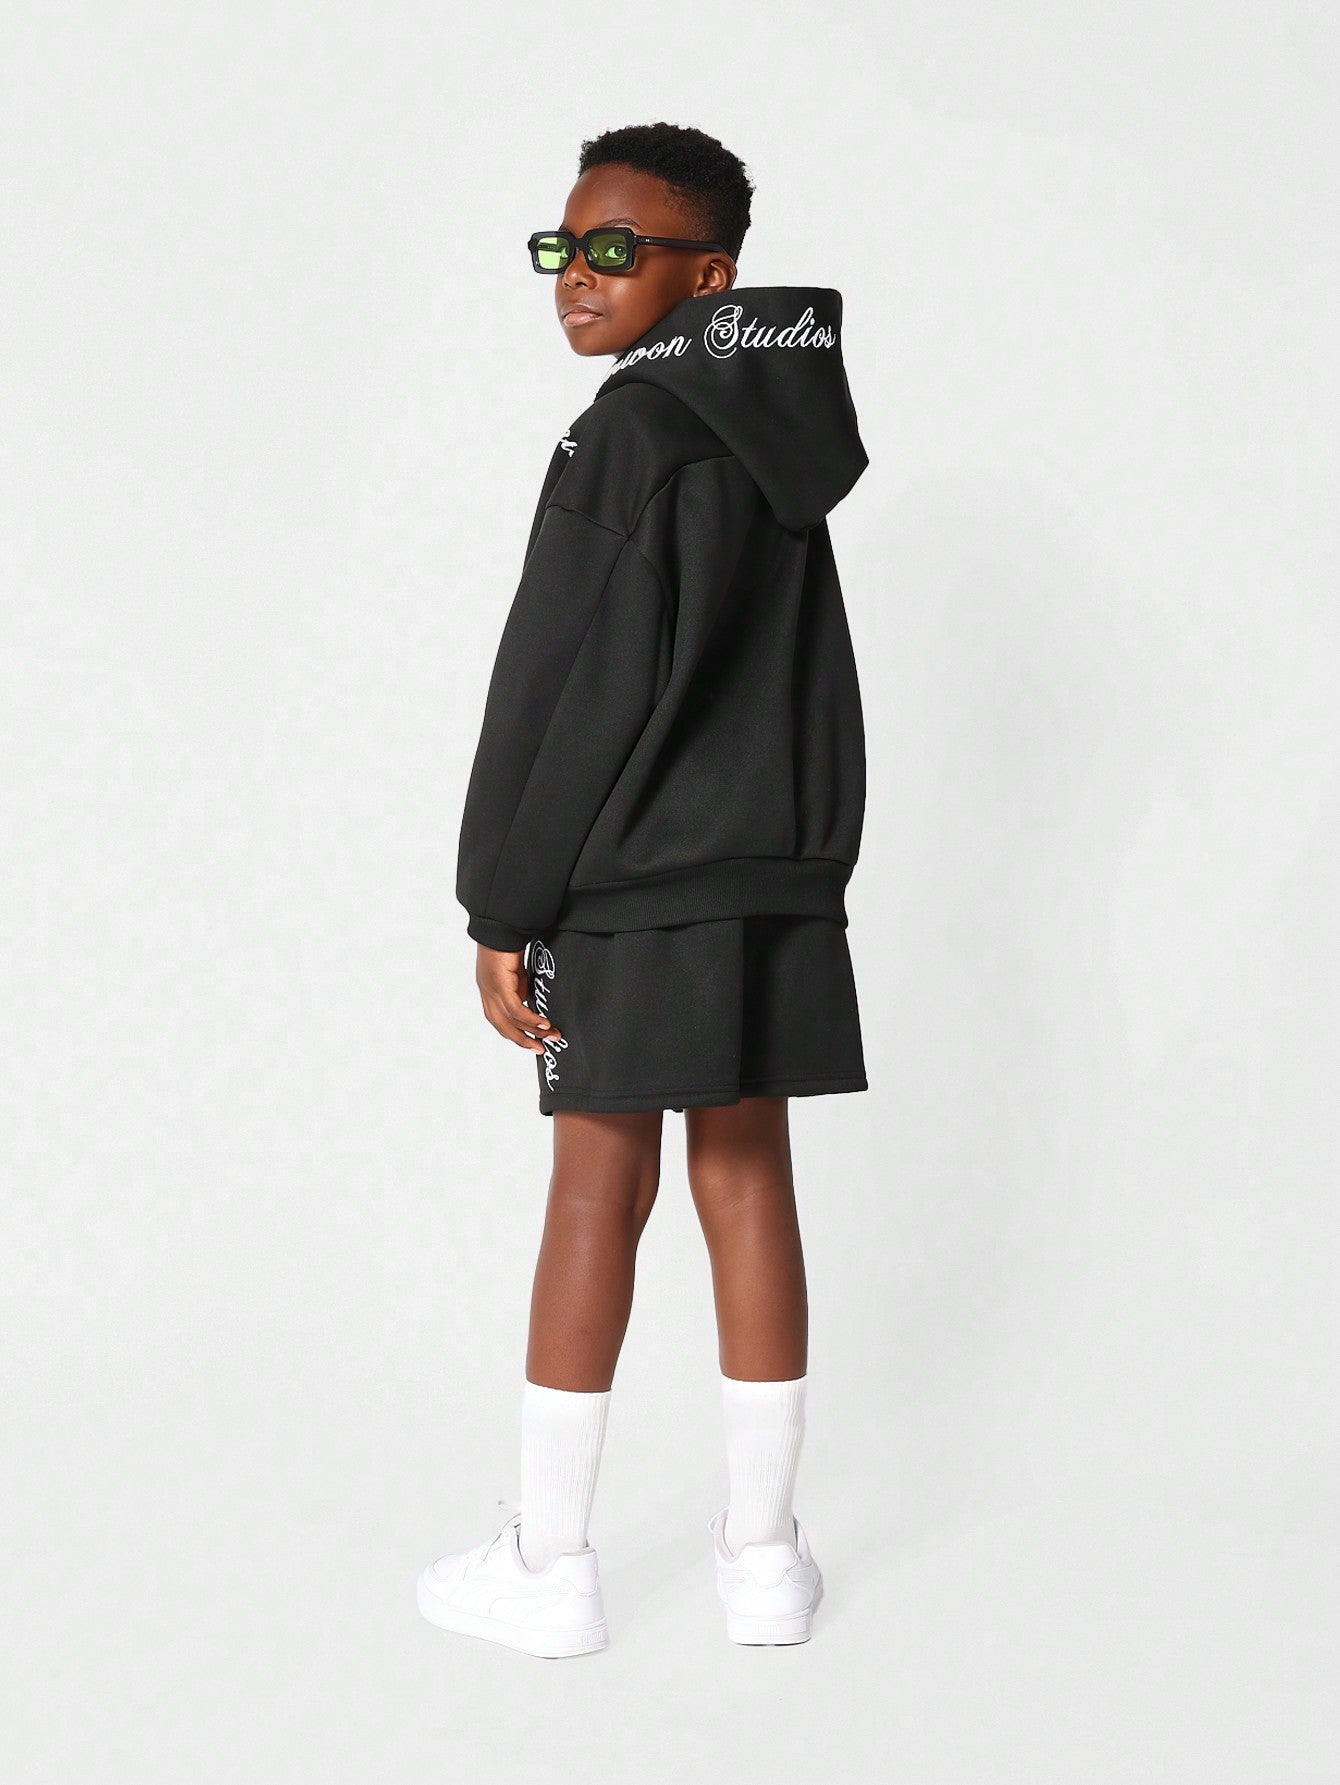 Kids Unisex 2 Piece Hoodie Set With Embroidery